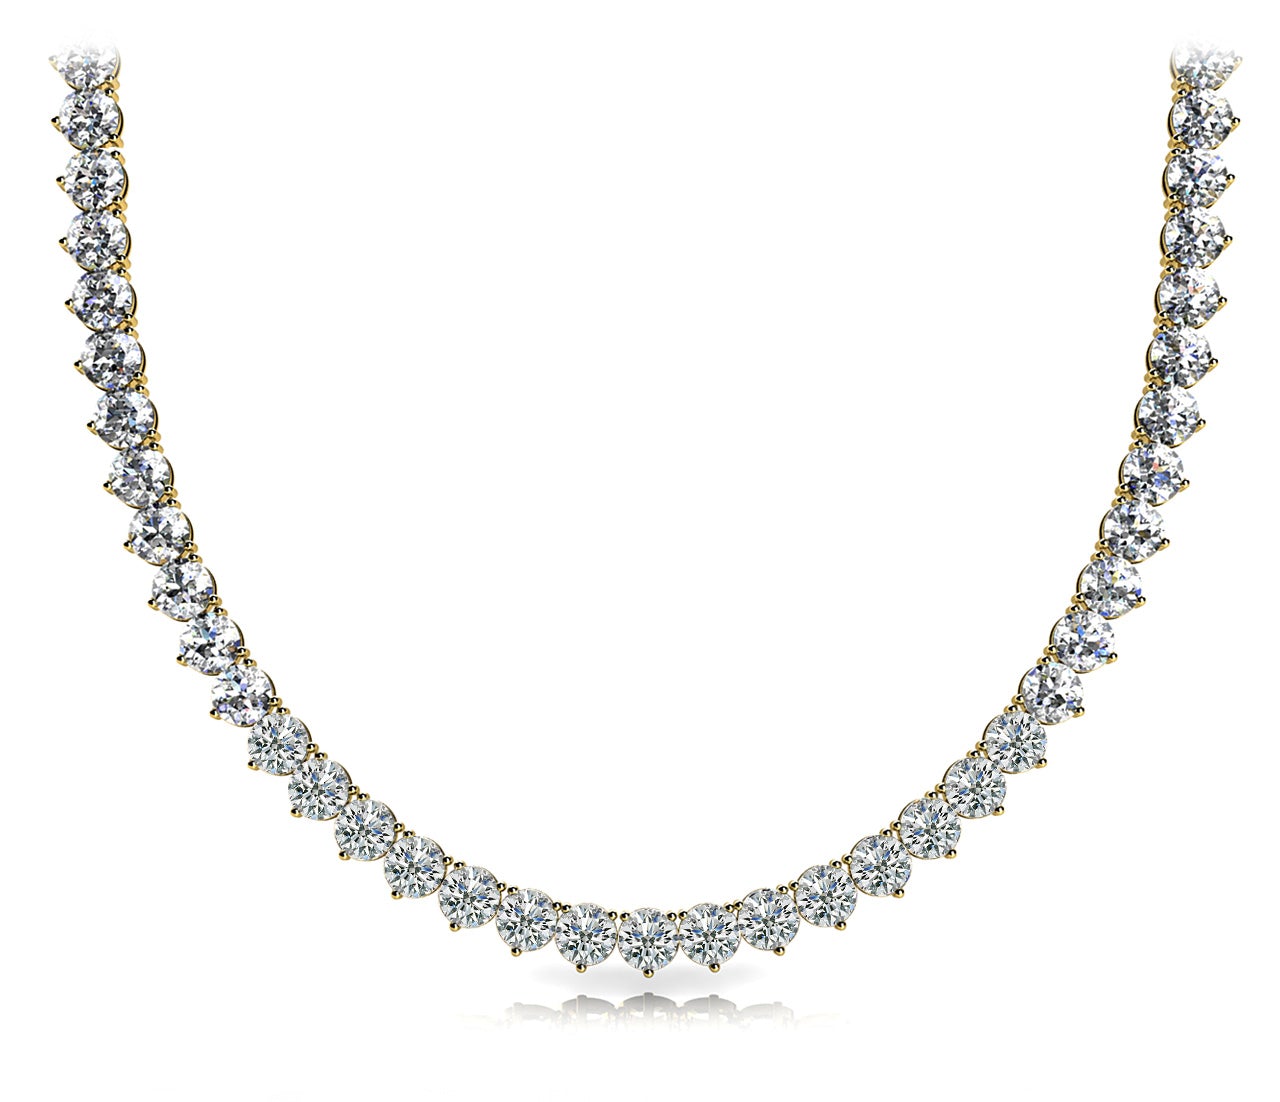 Diamond Tennis Necklace Round Shape 19 Carat Necklace in 18K Yellow Gold Front View